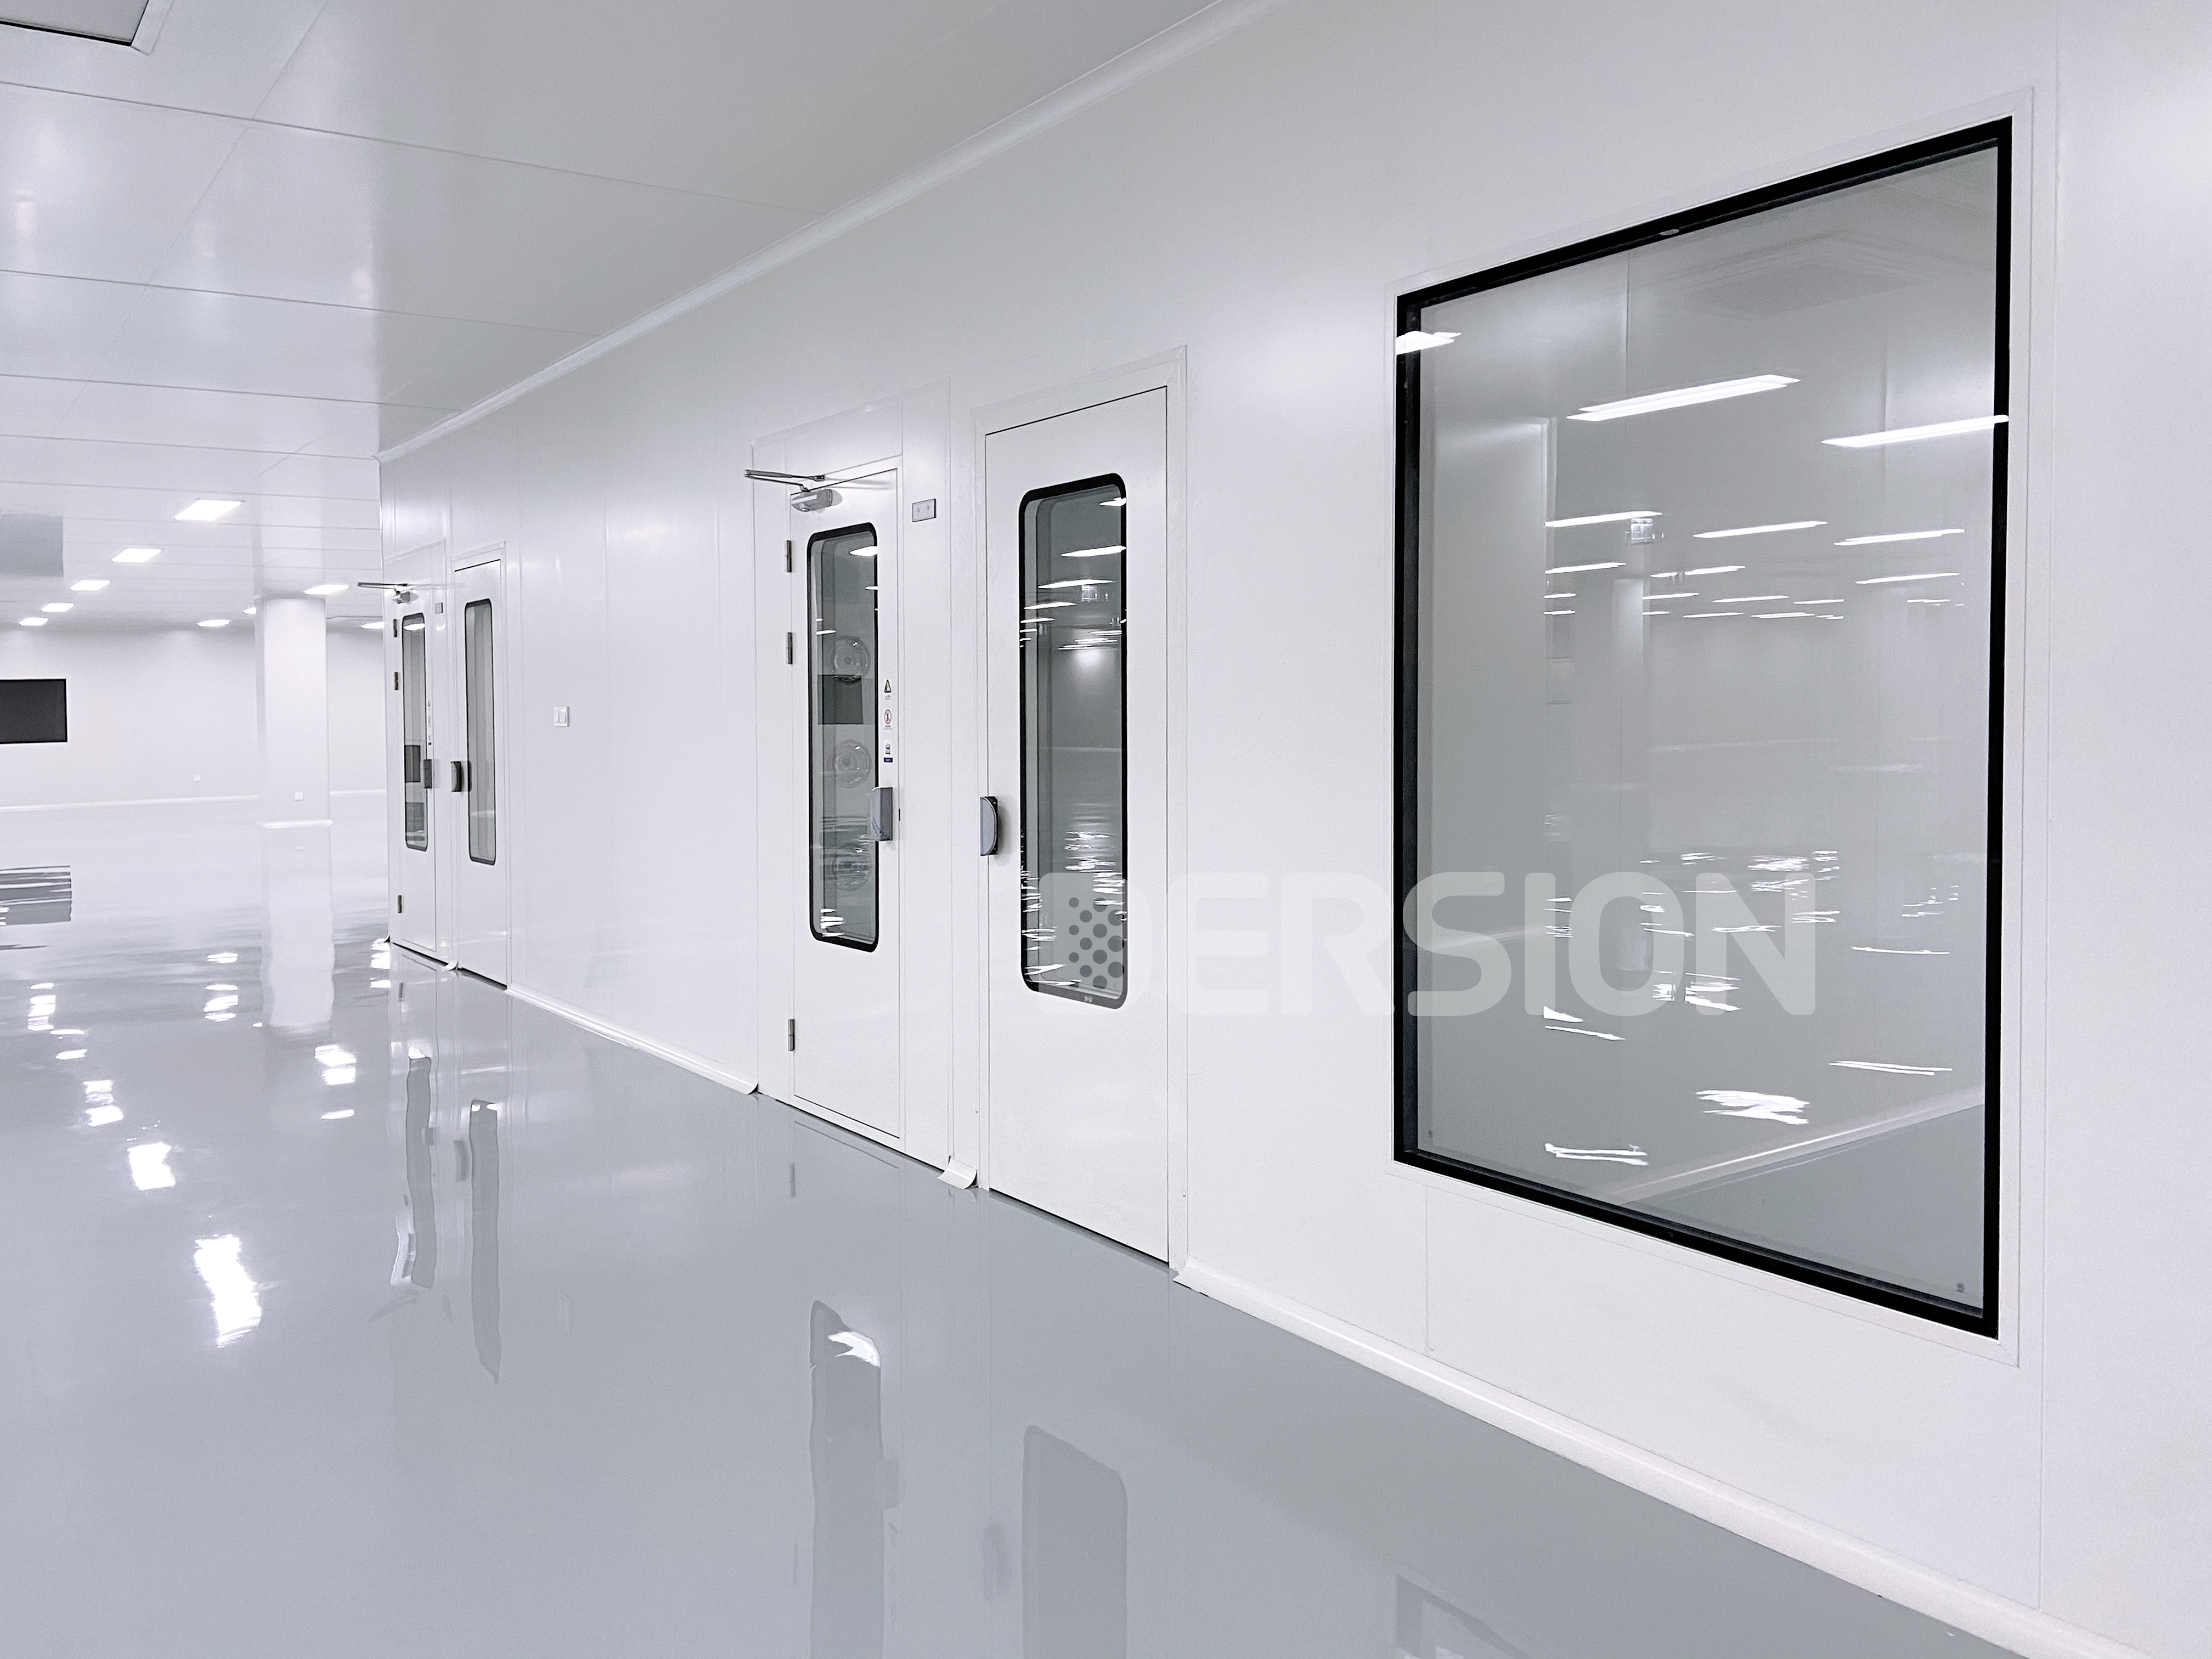 What to consider in the design of cleanroom tour corridors?